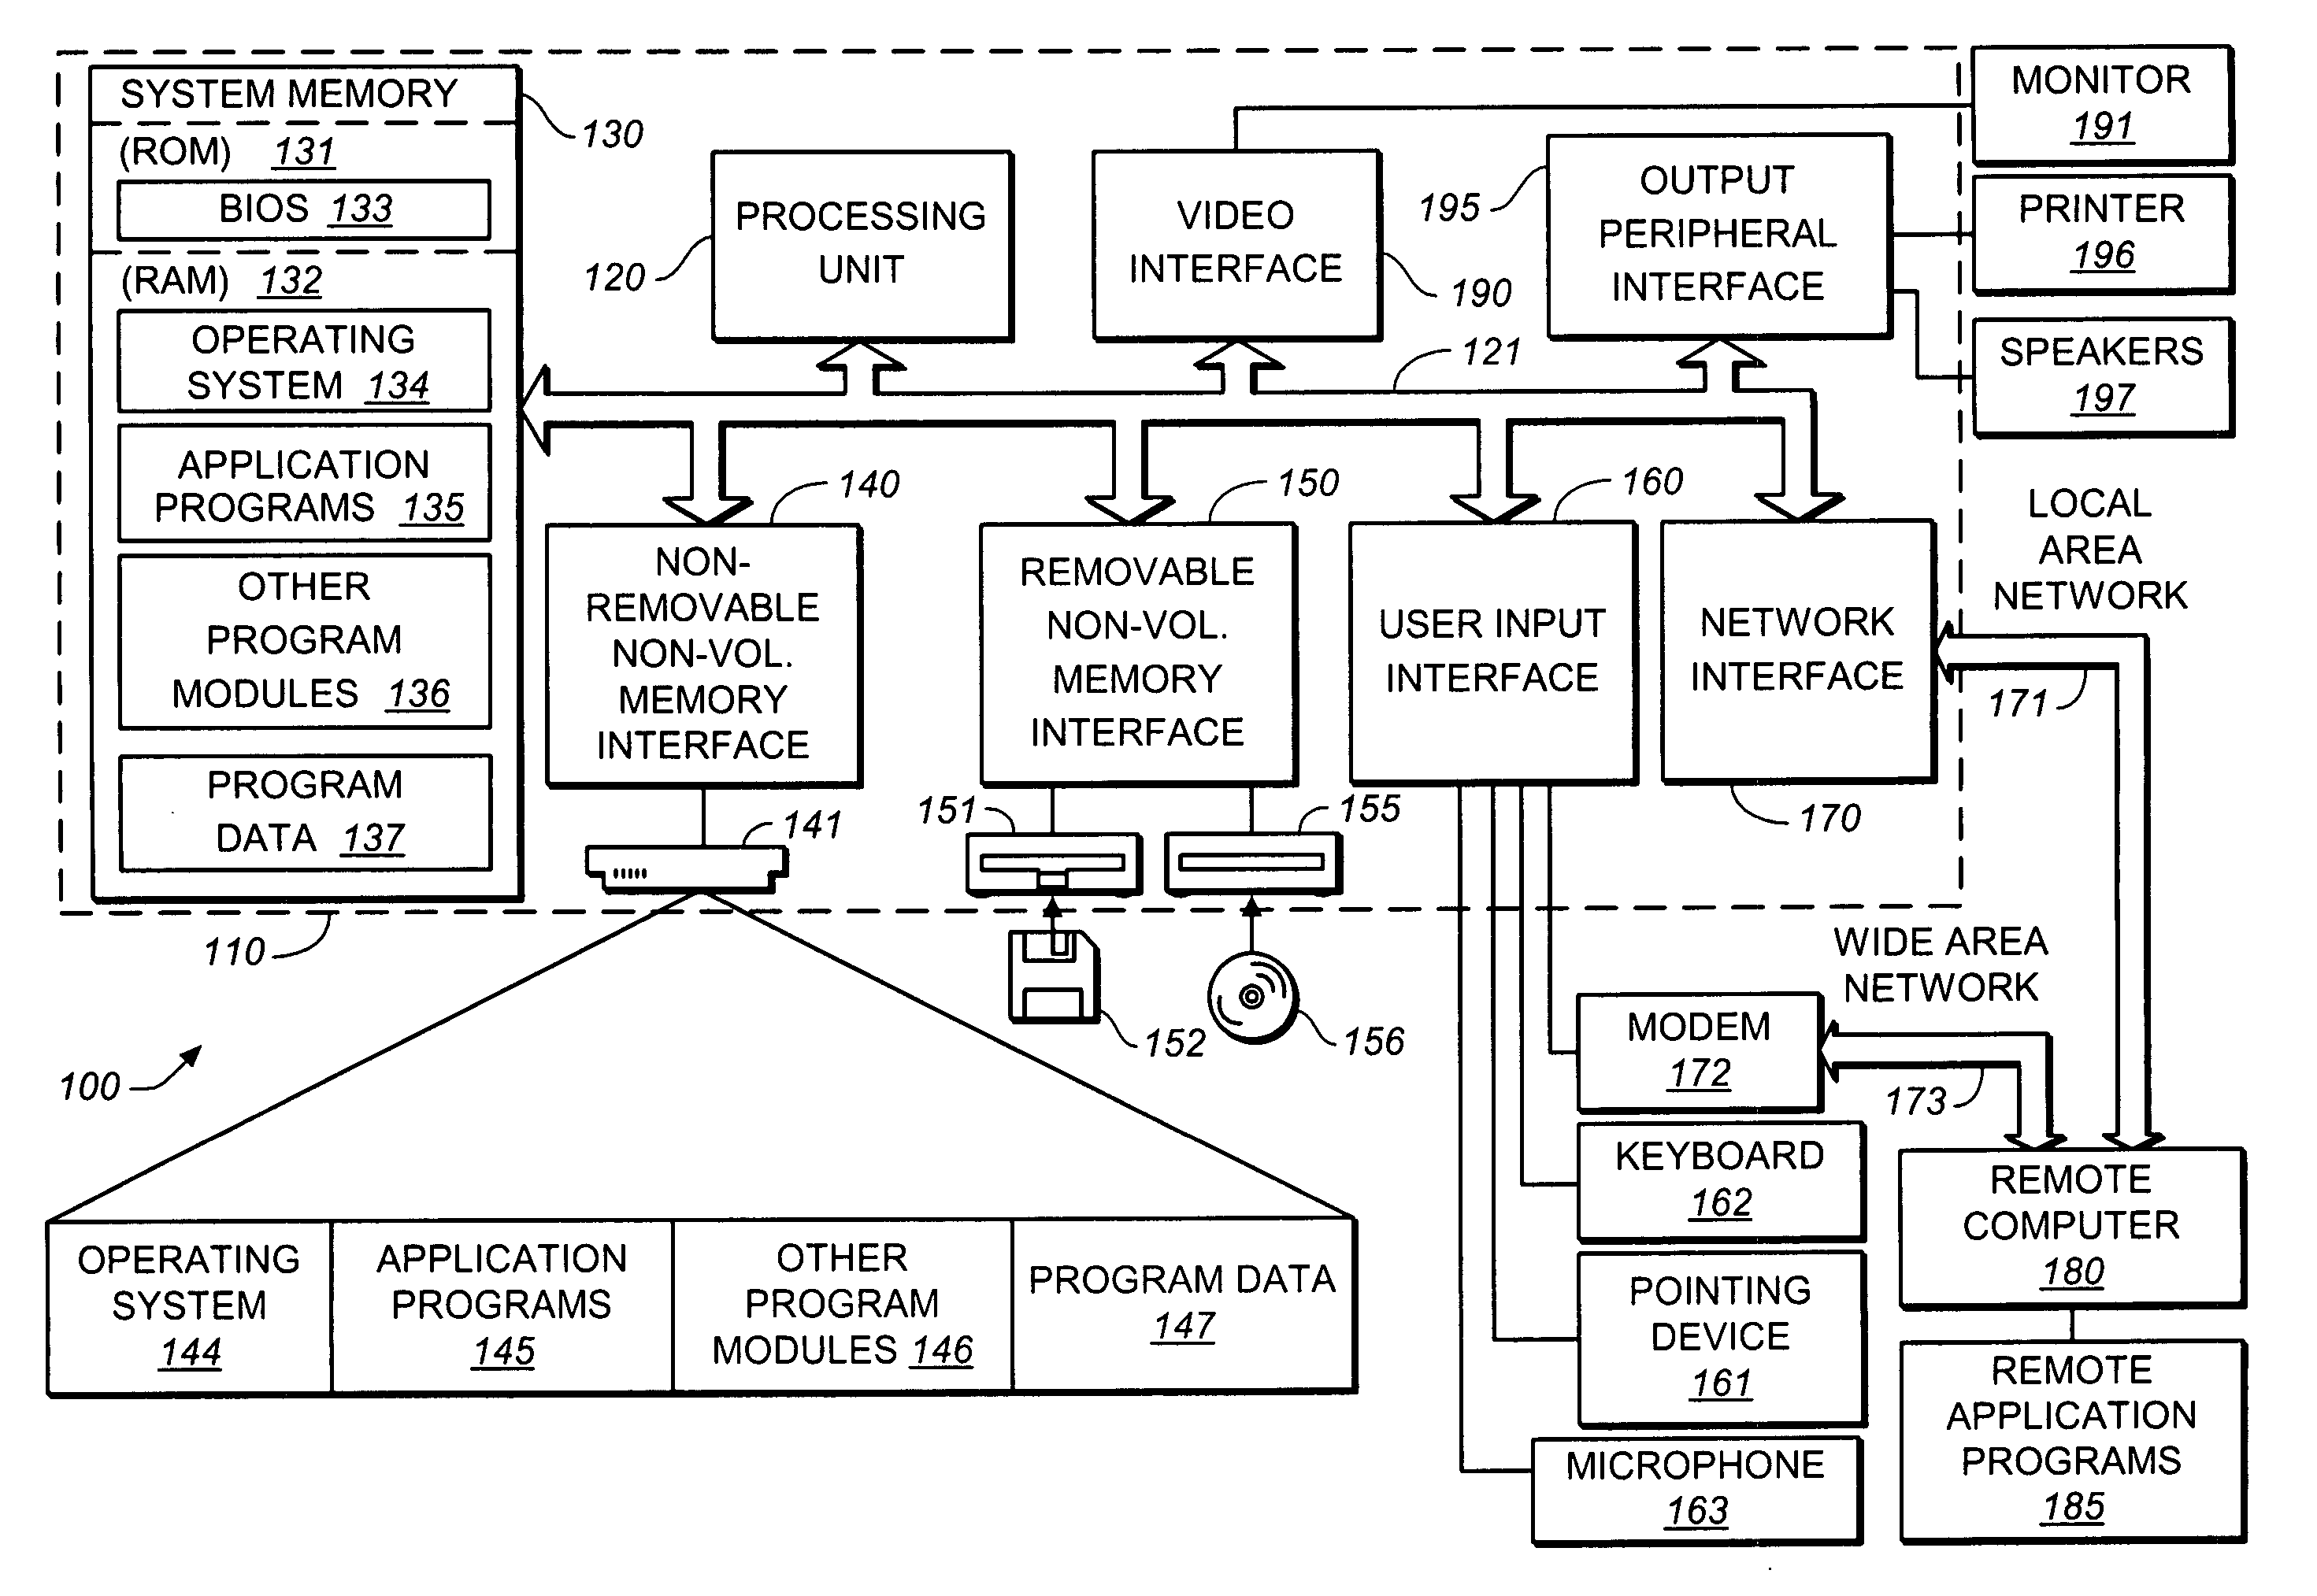 Organization structure system